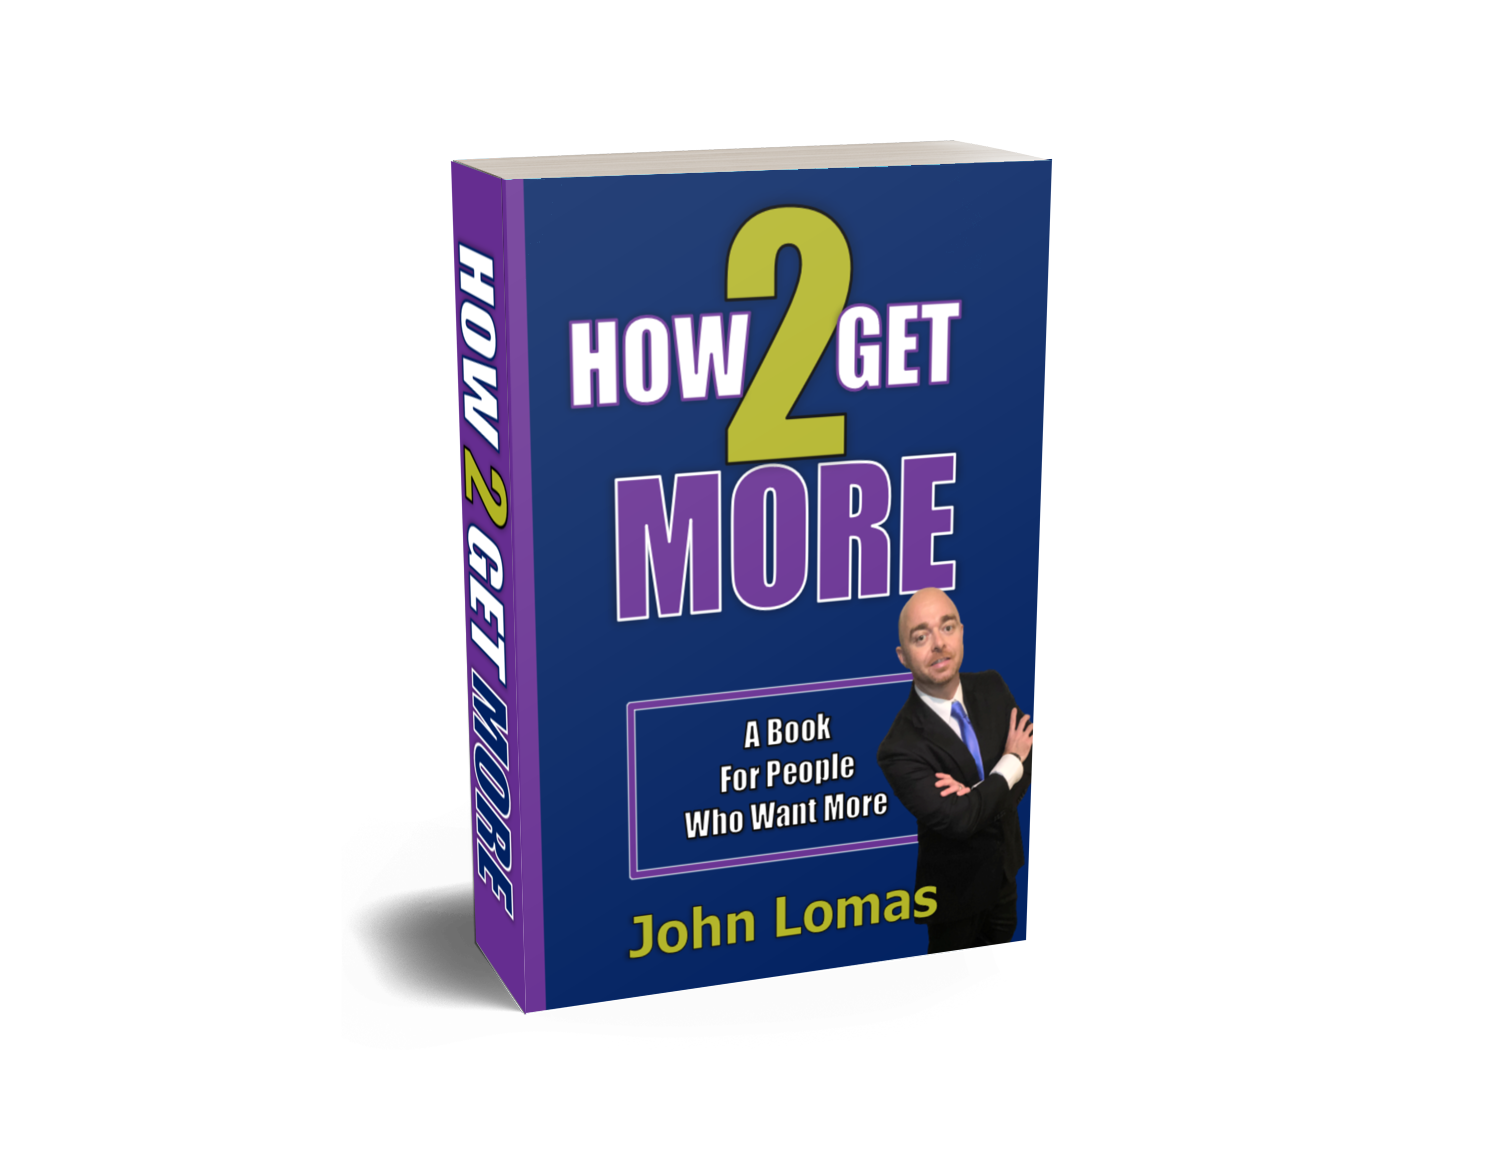 How 2 Get More: A Book For People Who Want More